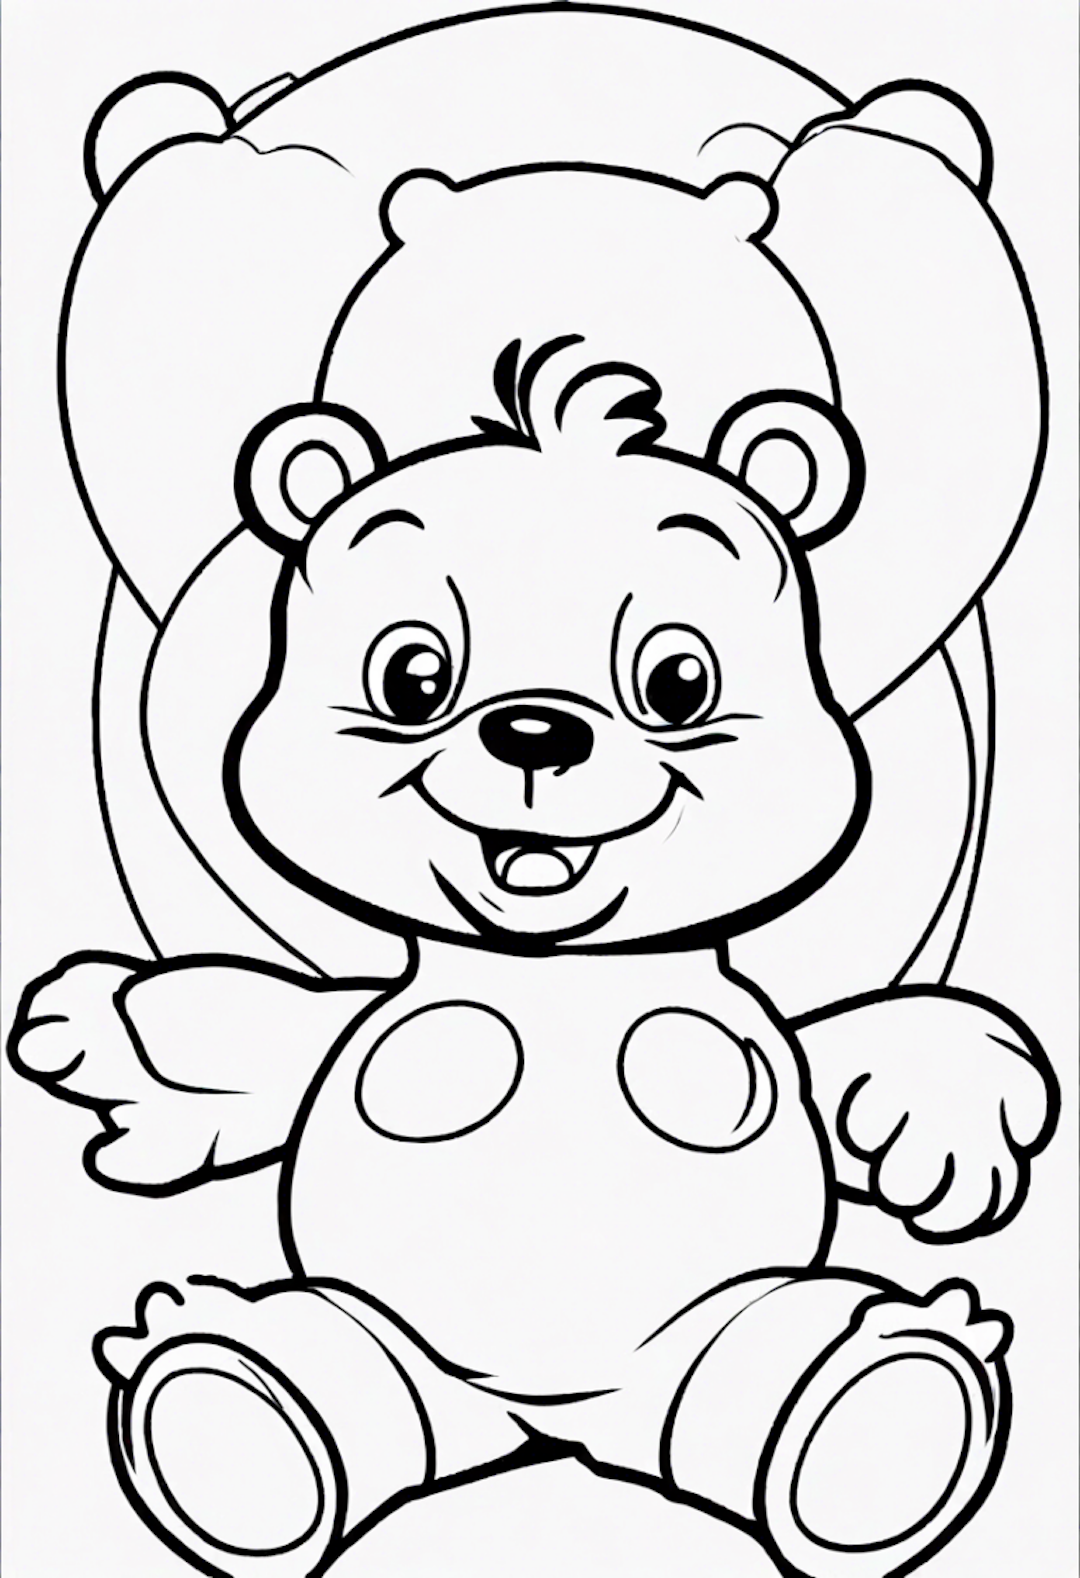 Happy Teddy Bear Coloring Fun coloring pages